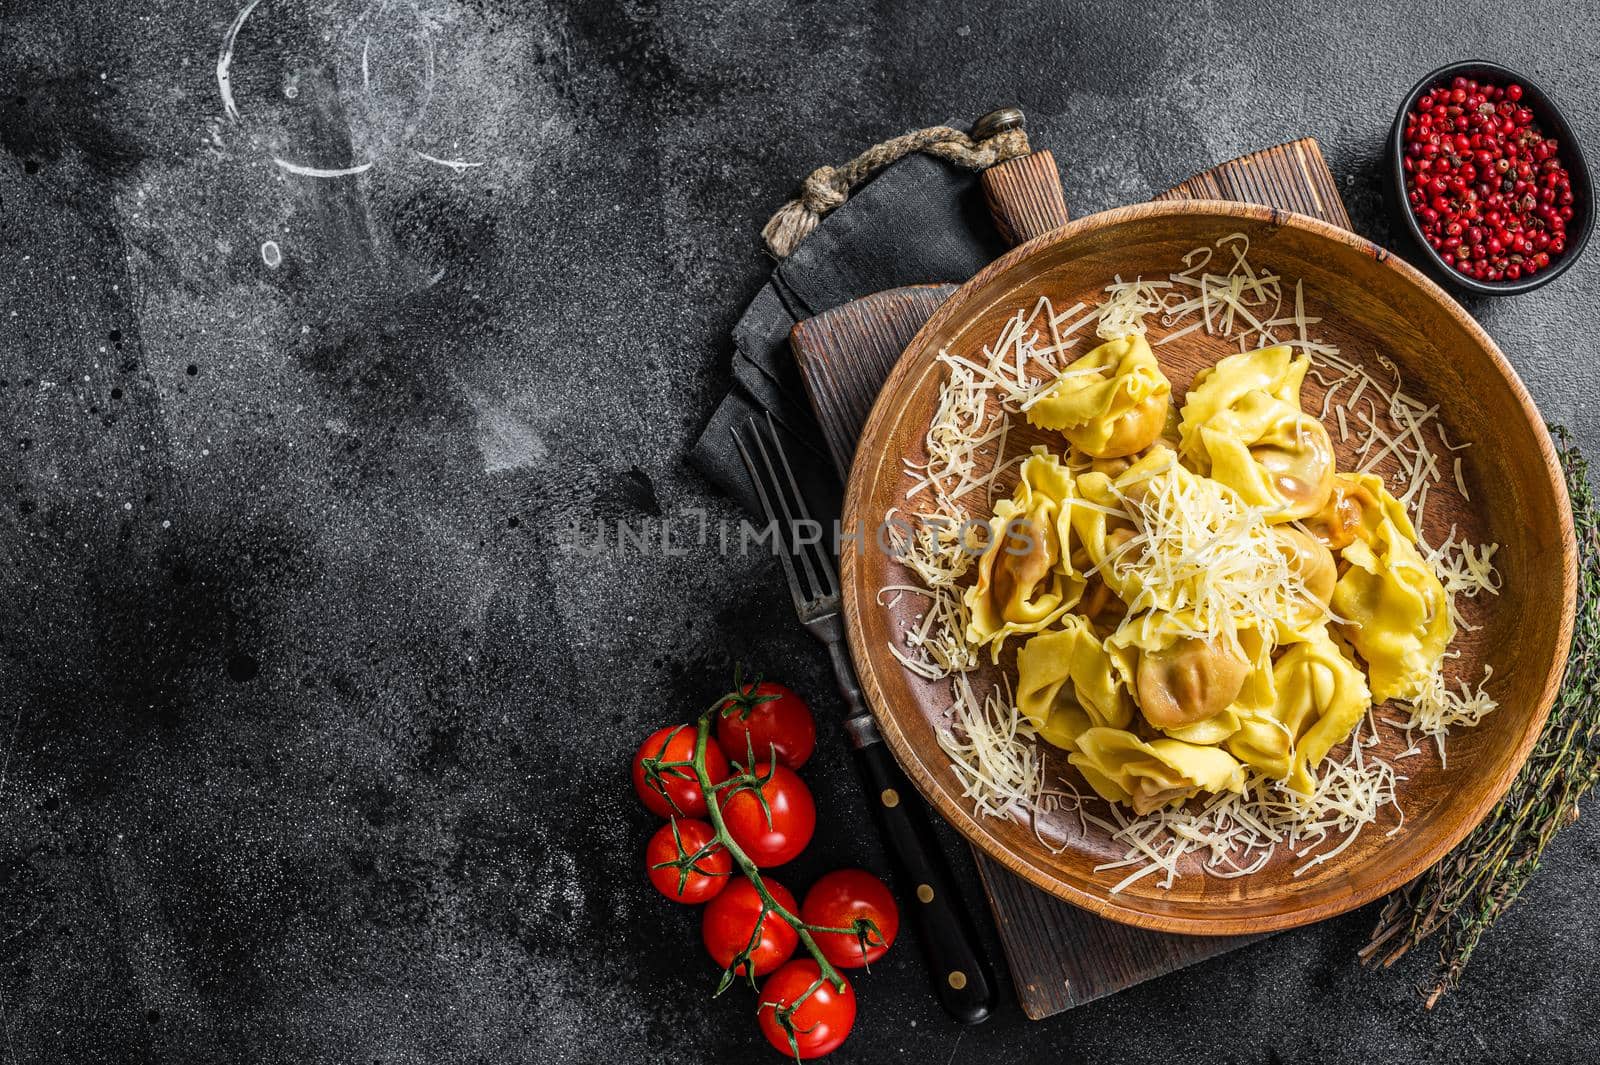 Italian ravioli Pasta with Mozzarella cheese and Tomato in wooden plate. Black background. Top view. Copy space.